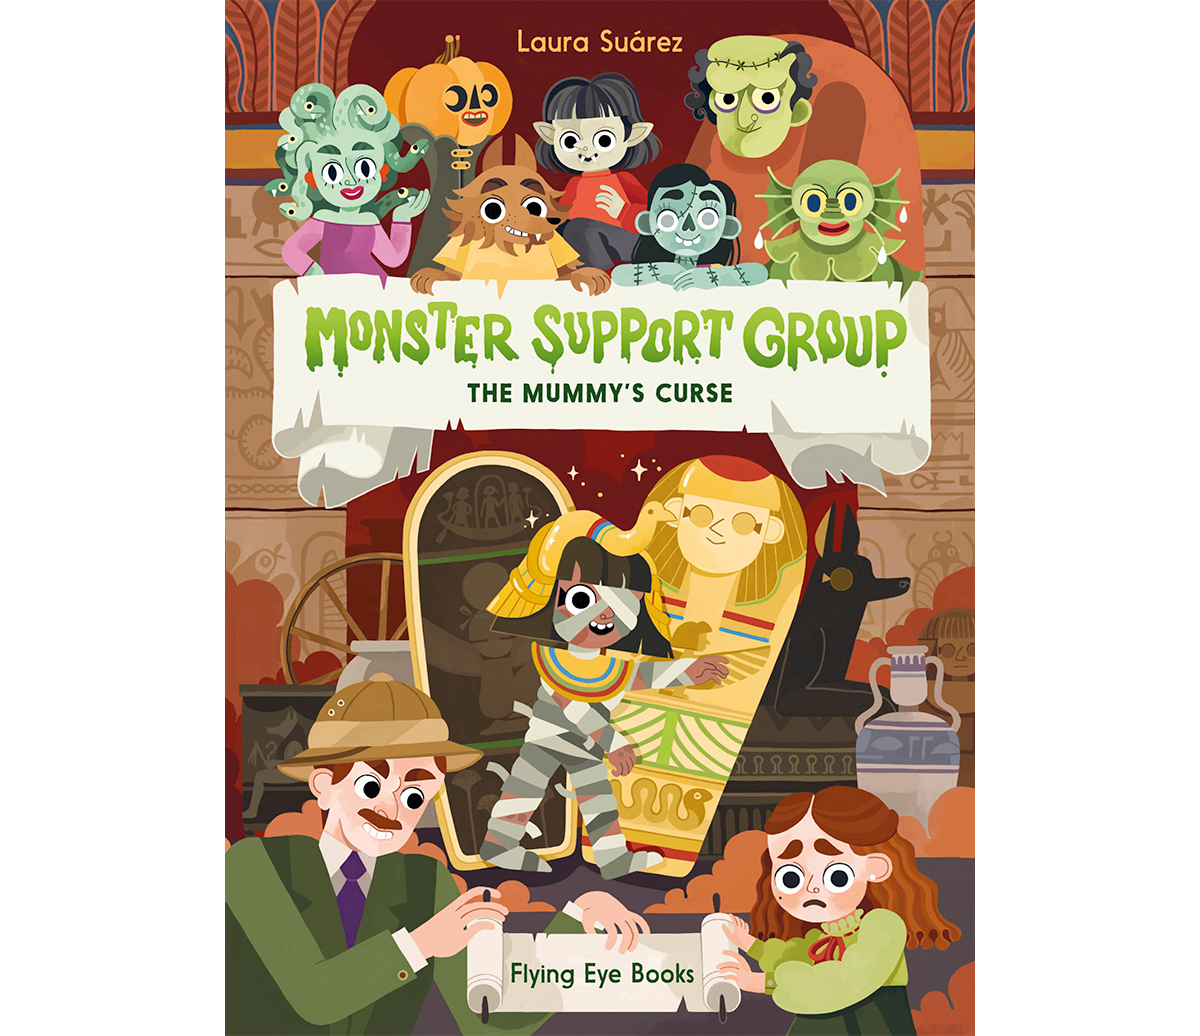 laura-suarez-monster-support0-group-cover-2.png